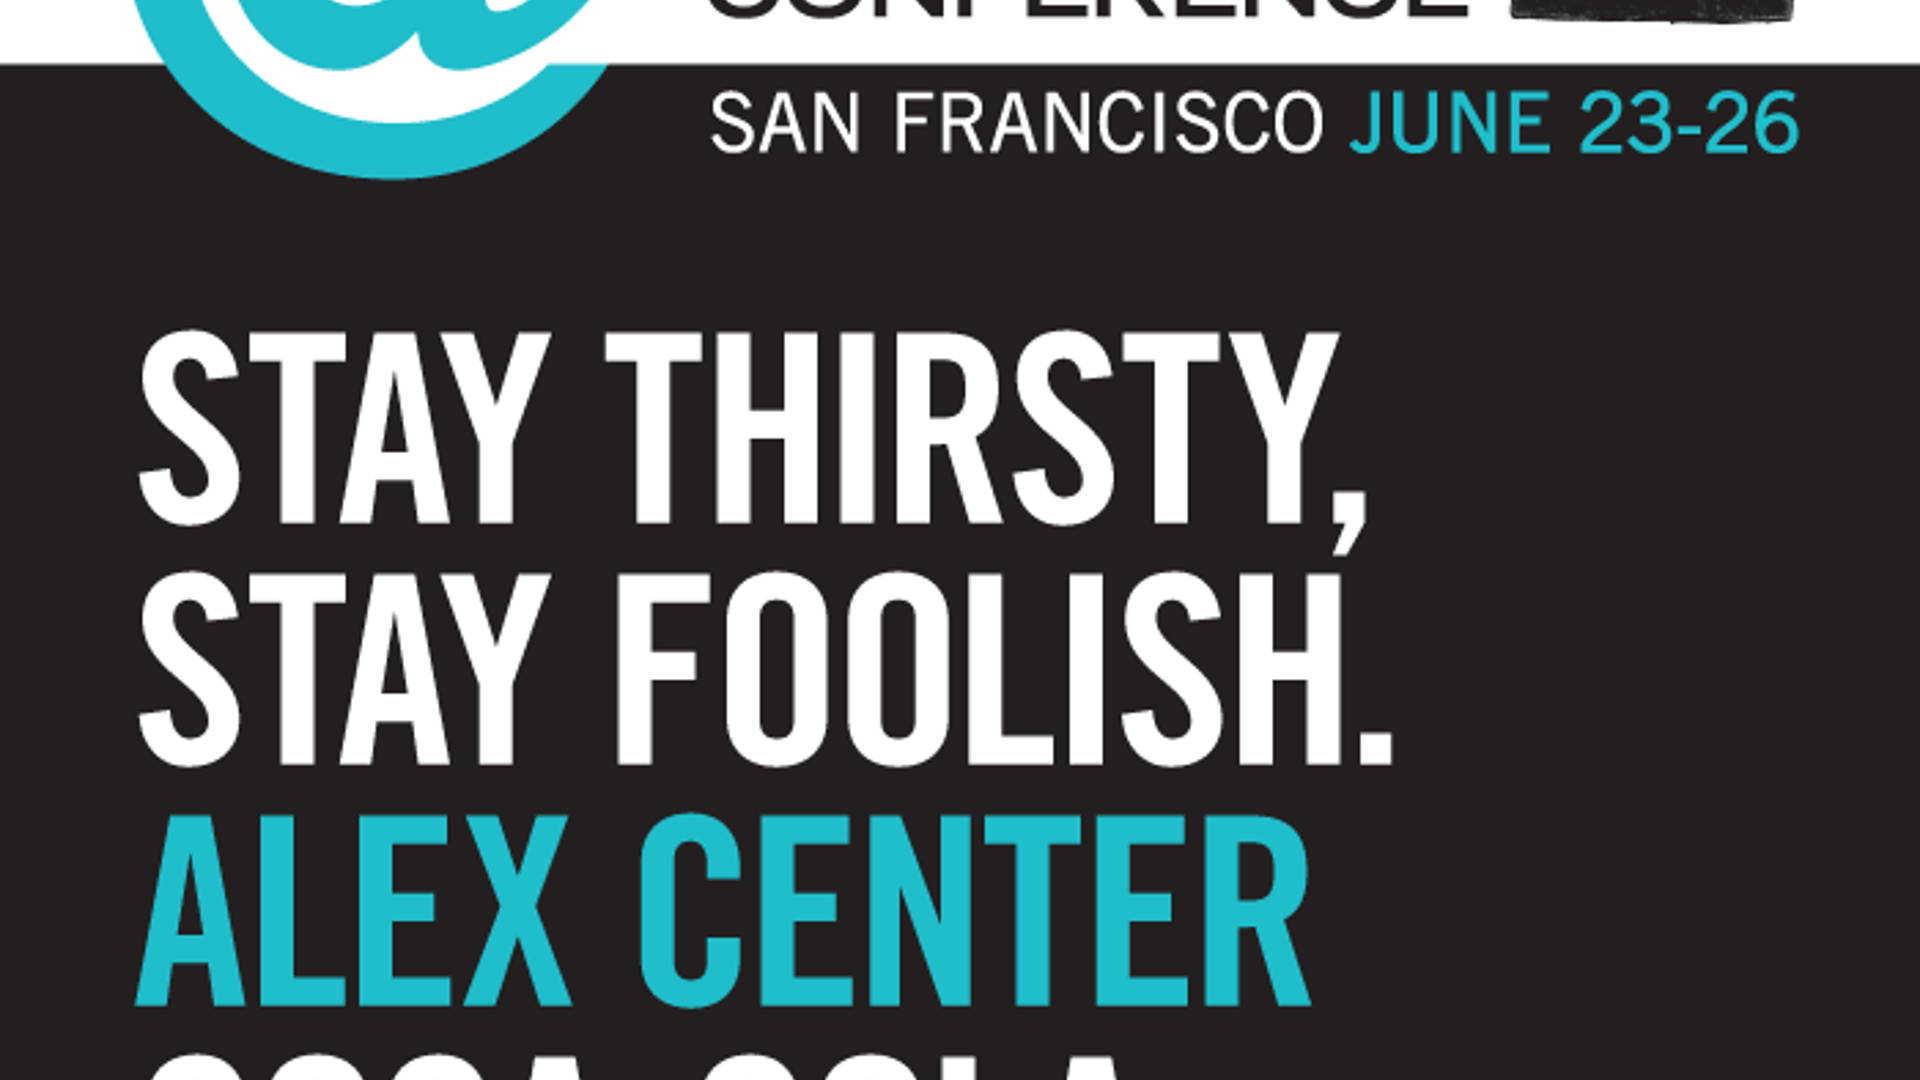 Featured image for @ The Dieline Conference: Stay Thirsty, Stay Foolish - Alex Center